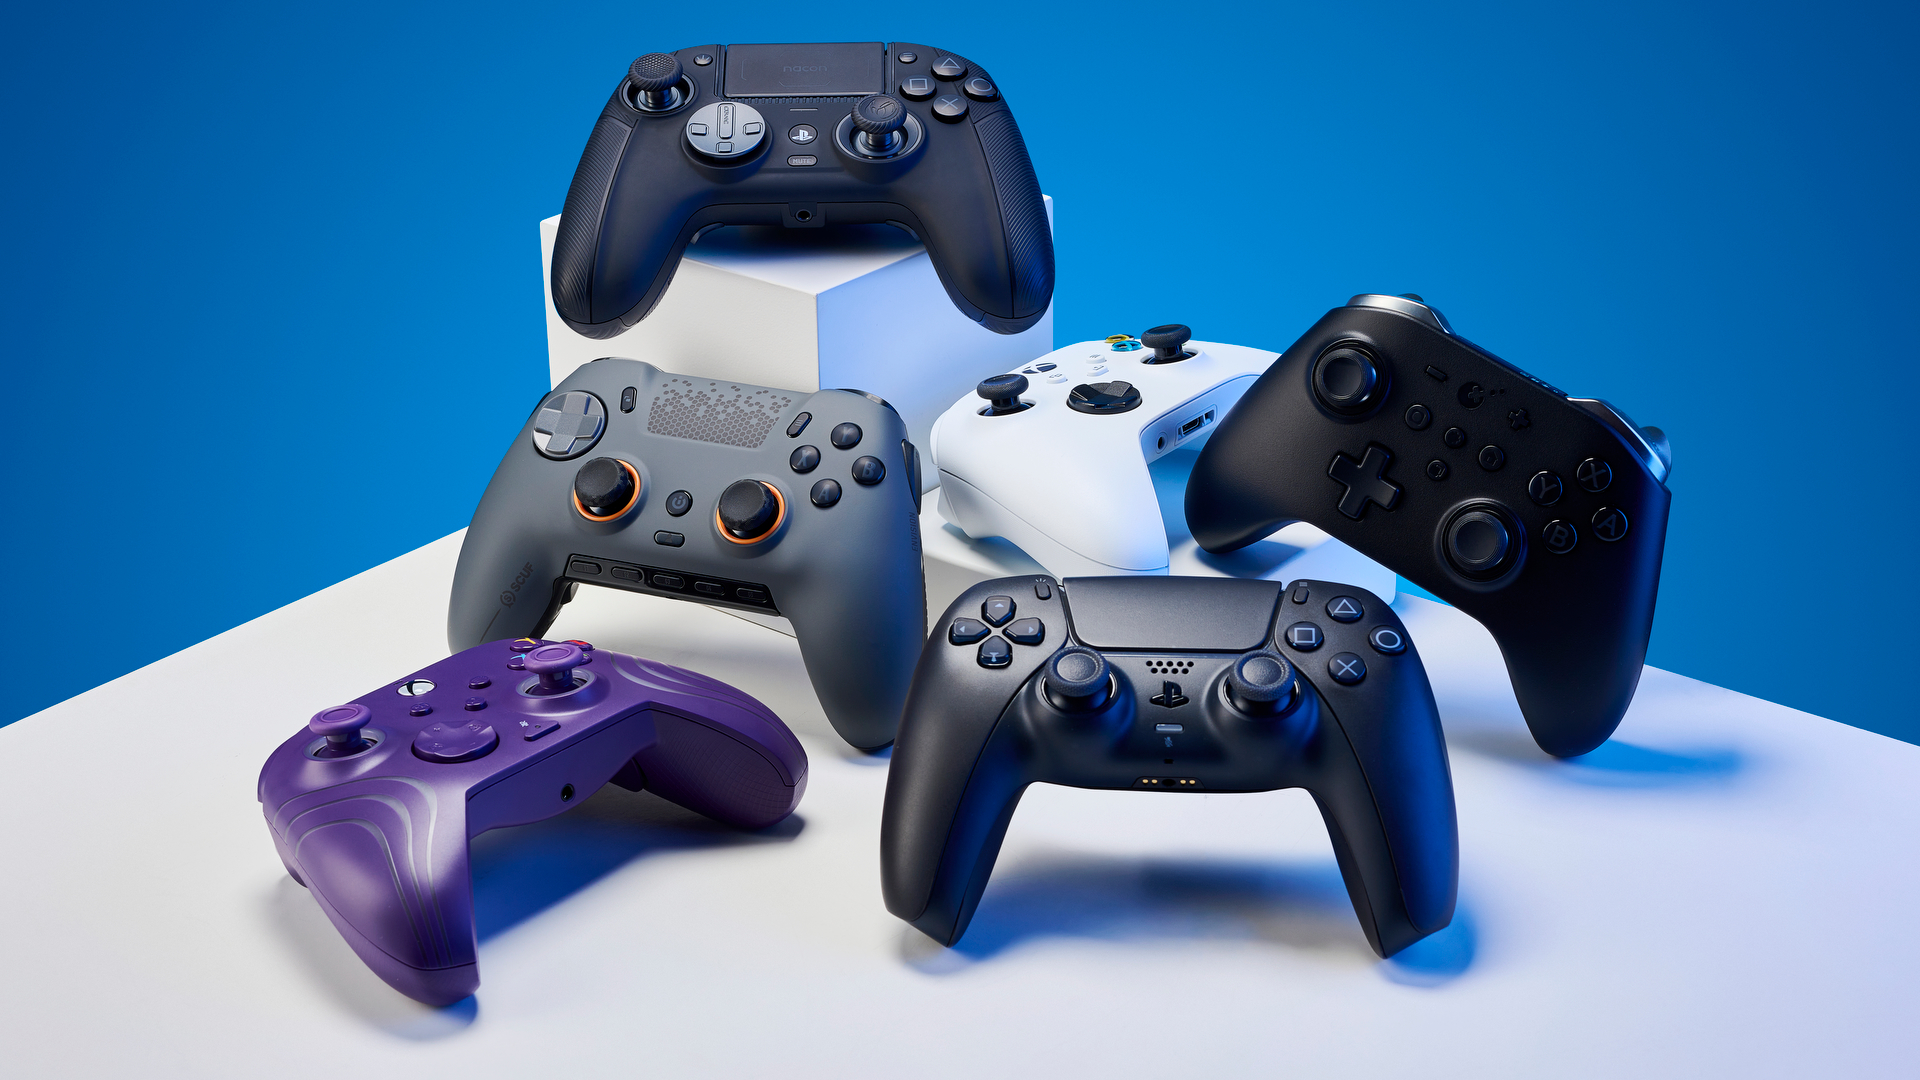 A collection of controllers on a blue background.